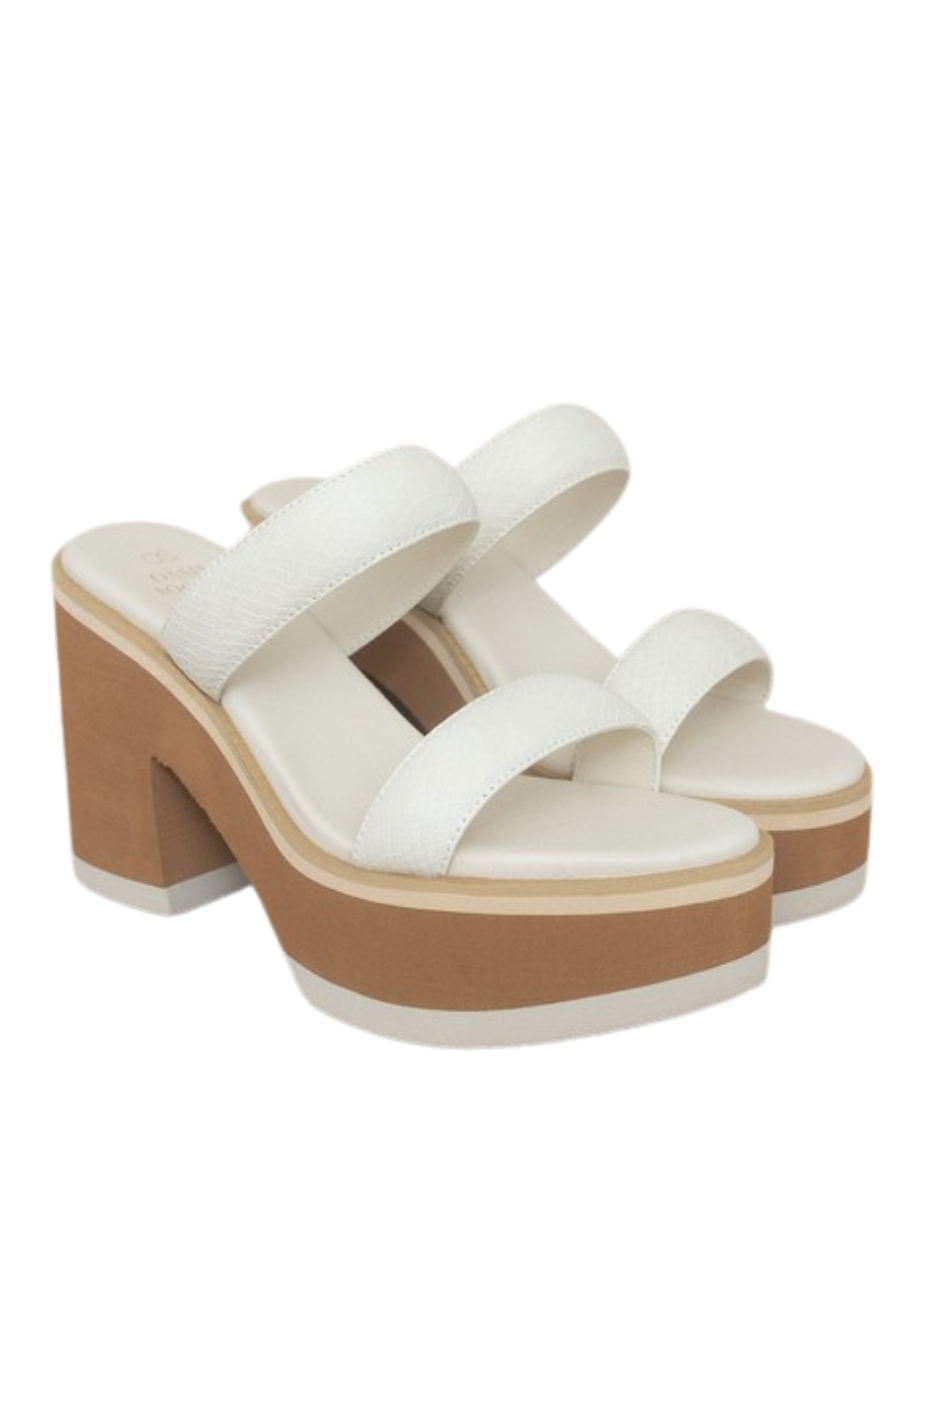 Daphne Chunky Heeled Sandal - Expressive Collective CO.